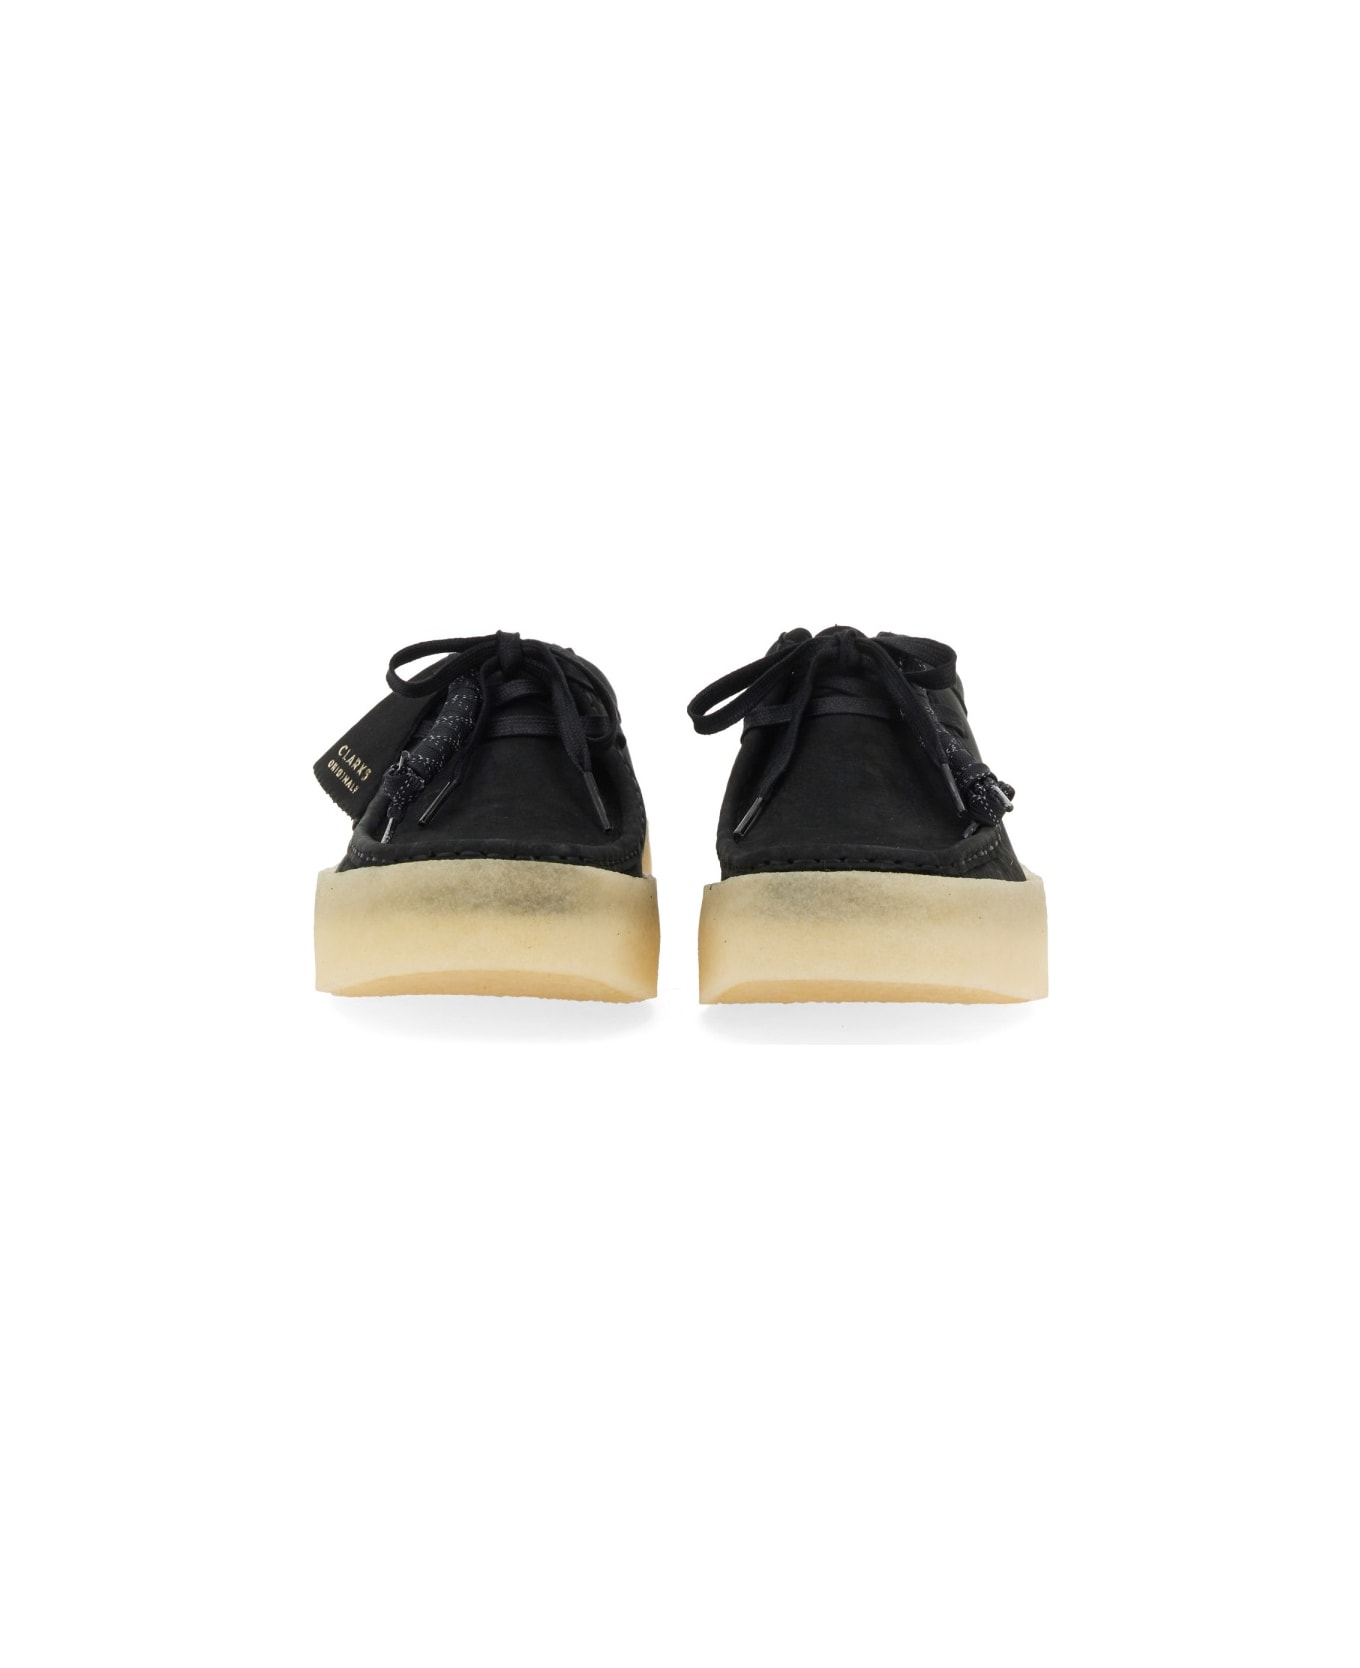 Clarks Moccasin Wallabee Cup - BLACK レースアップシューズ